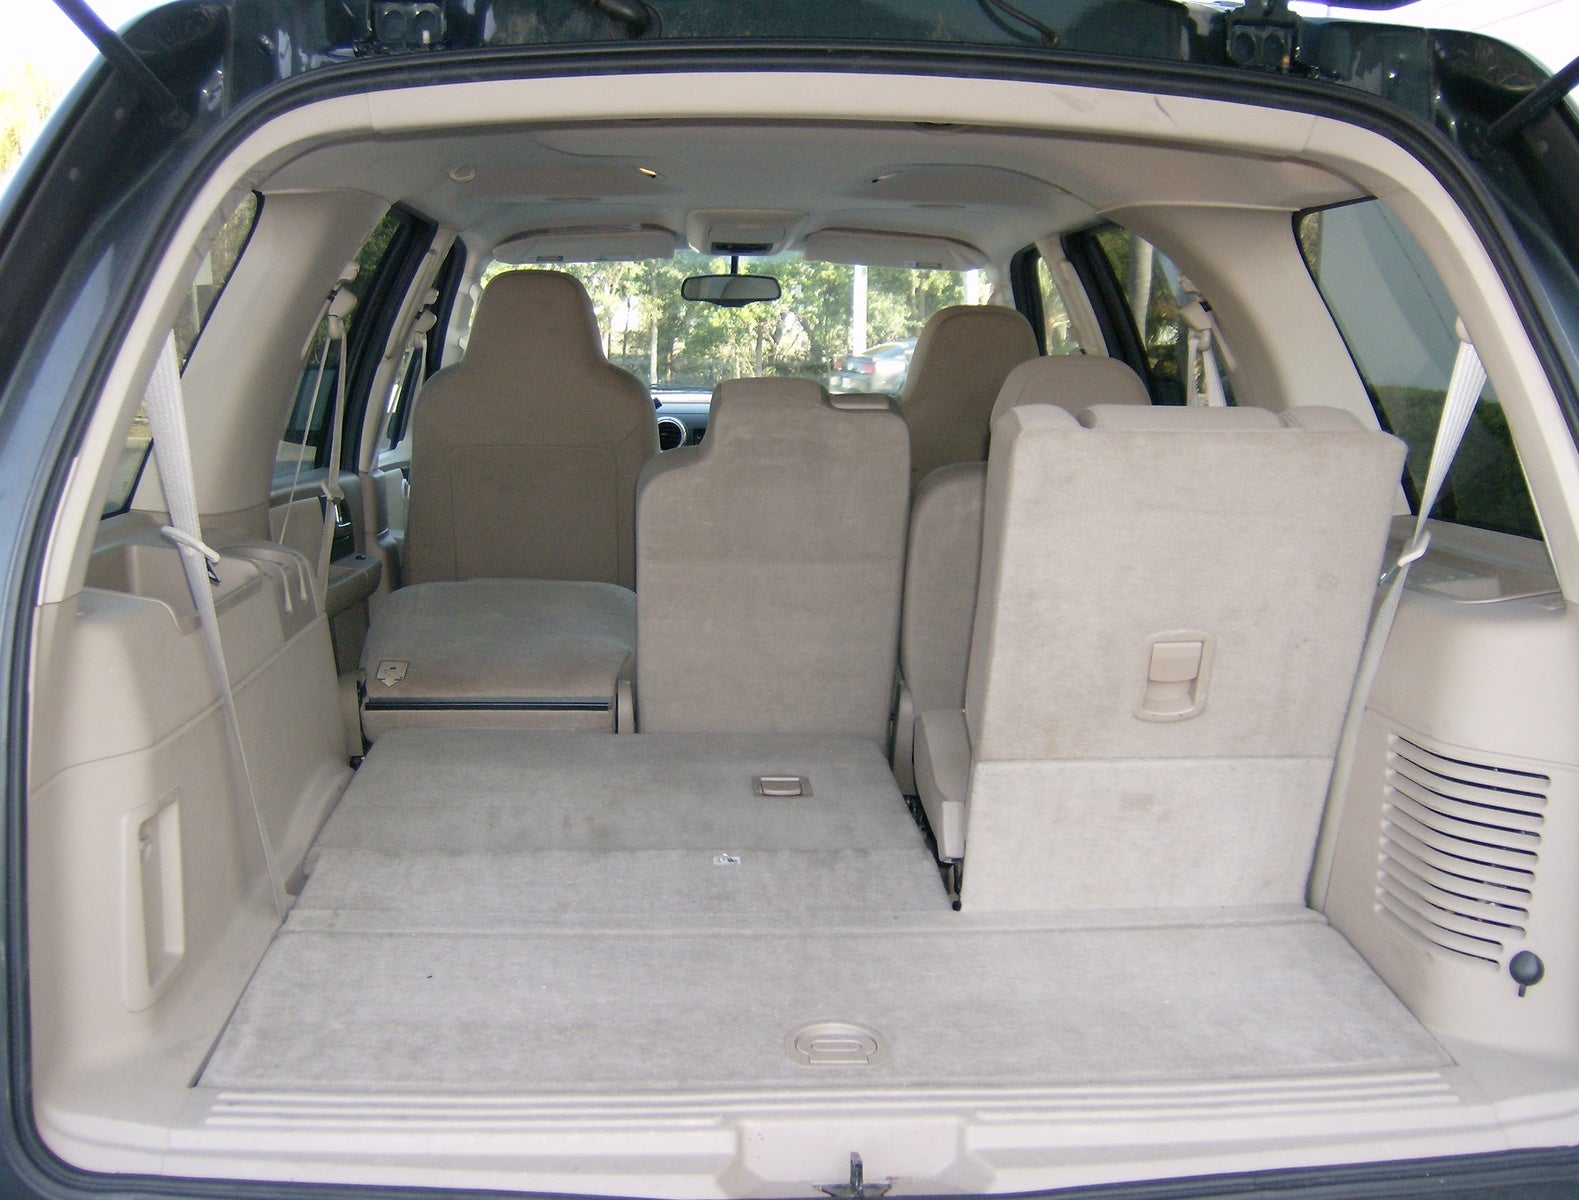 2005 Ford expedition interior dimensions #8